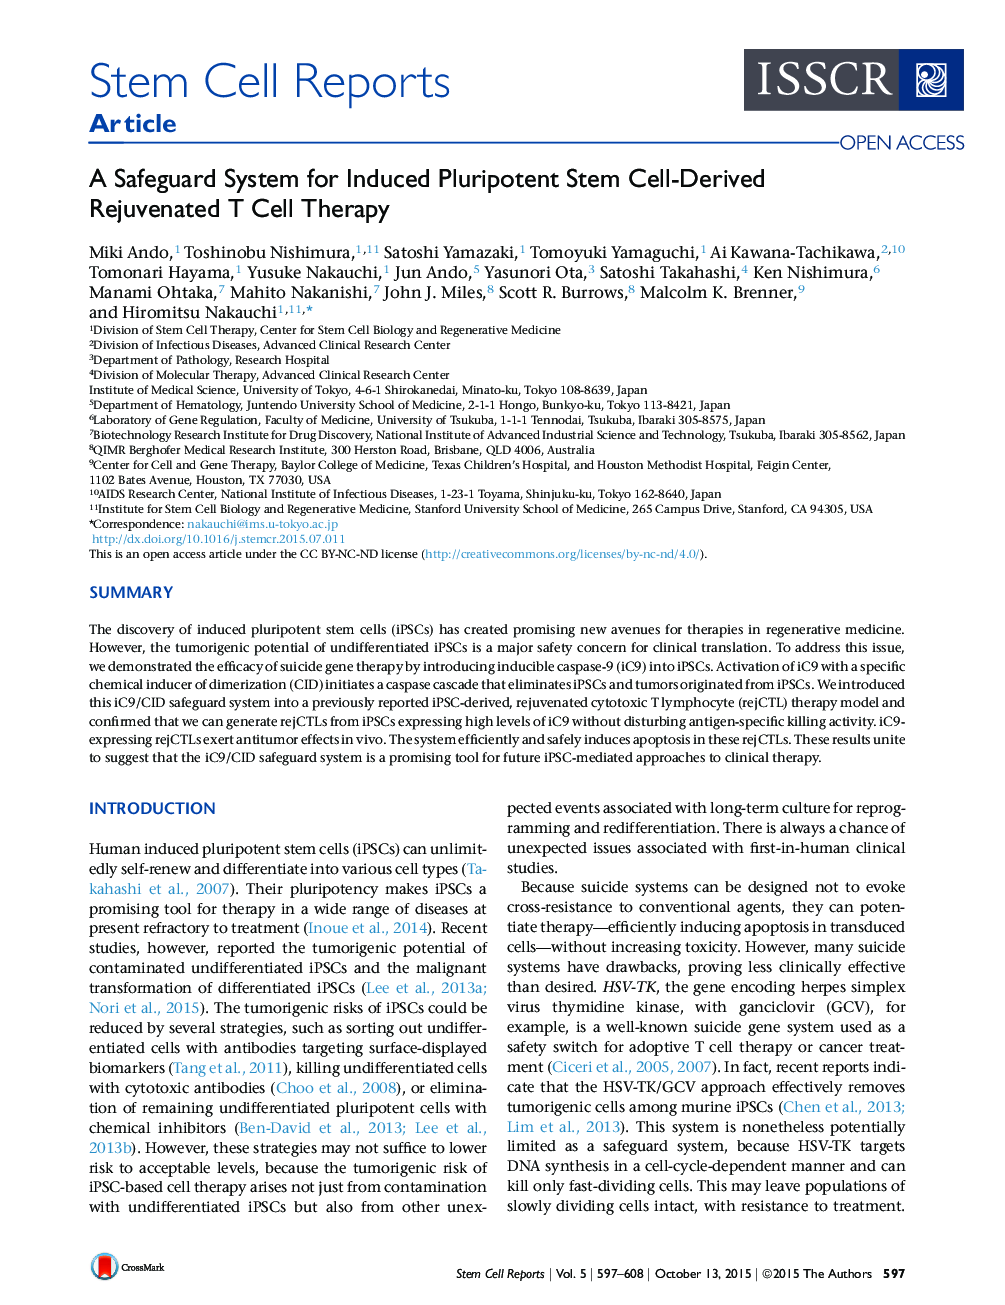 A Safeguard System for Induced Pluripotent Stem Cell-Derived Rejuvenated T Cell Therapy 